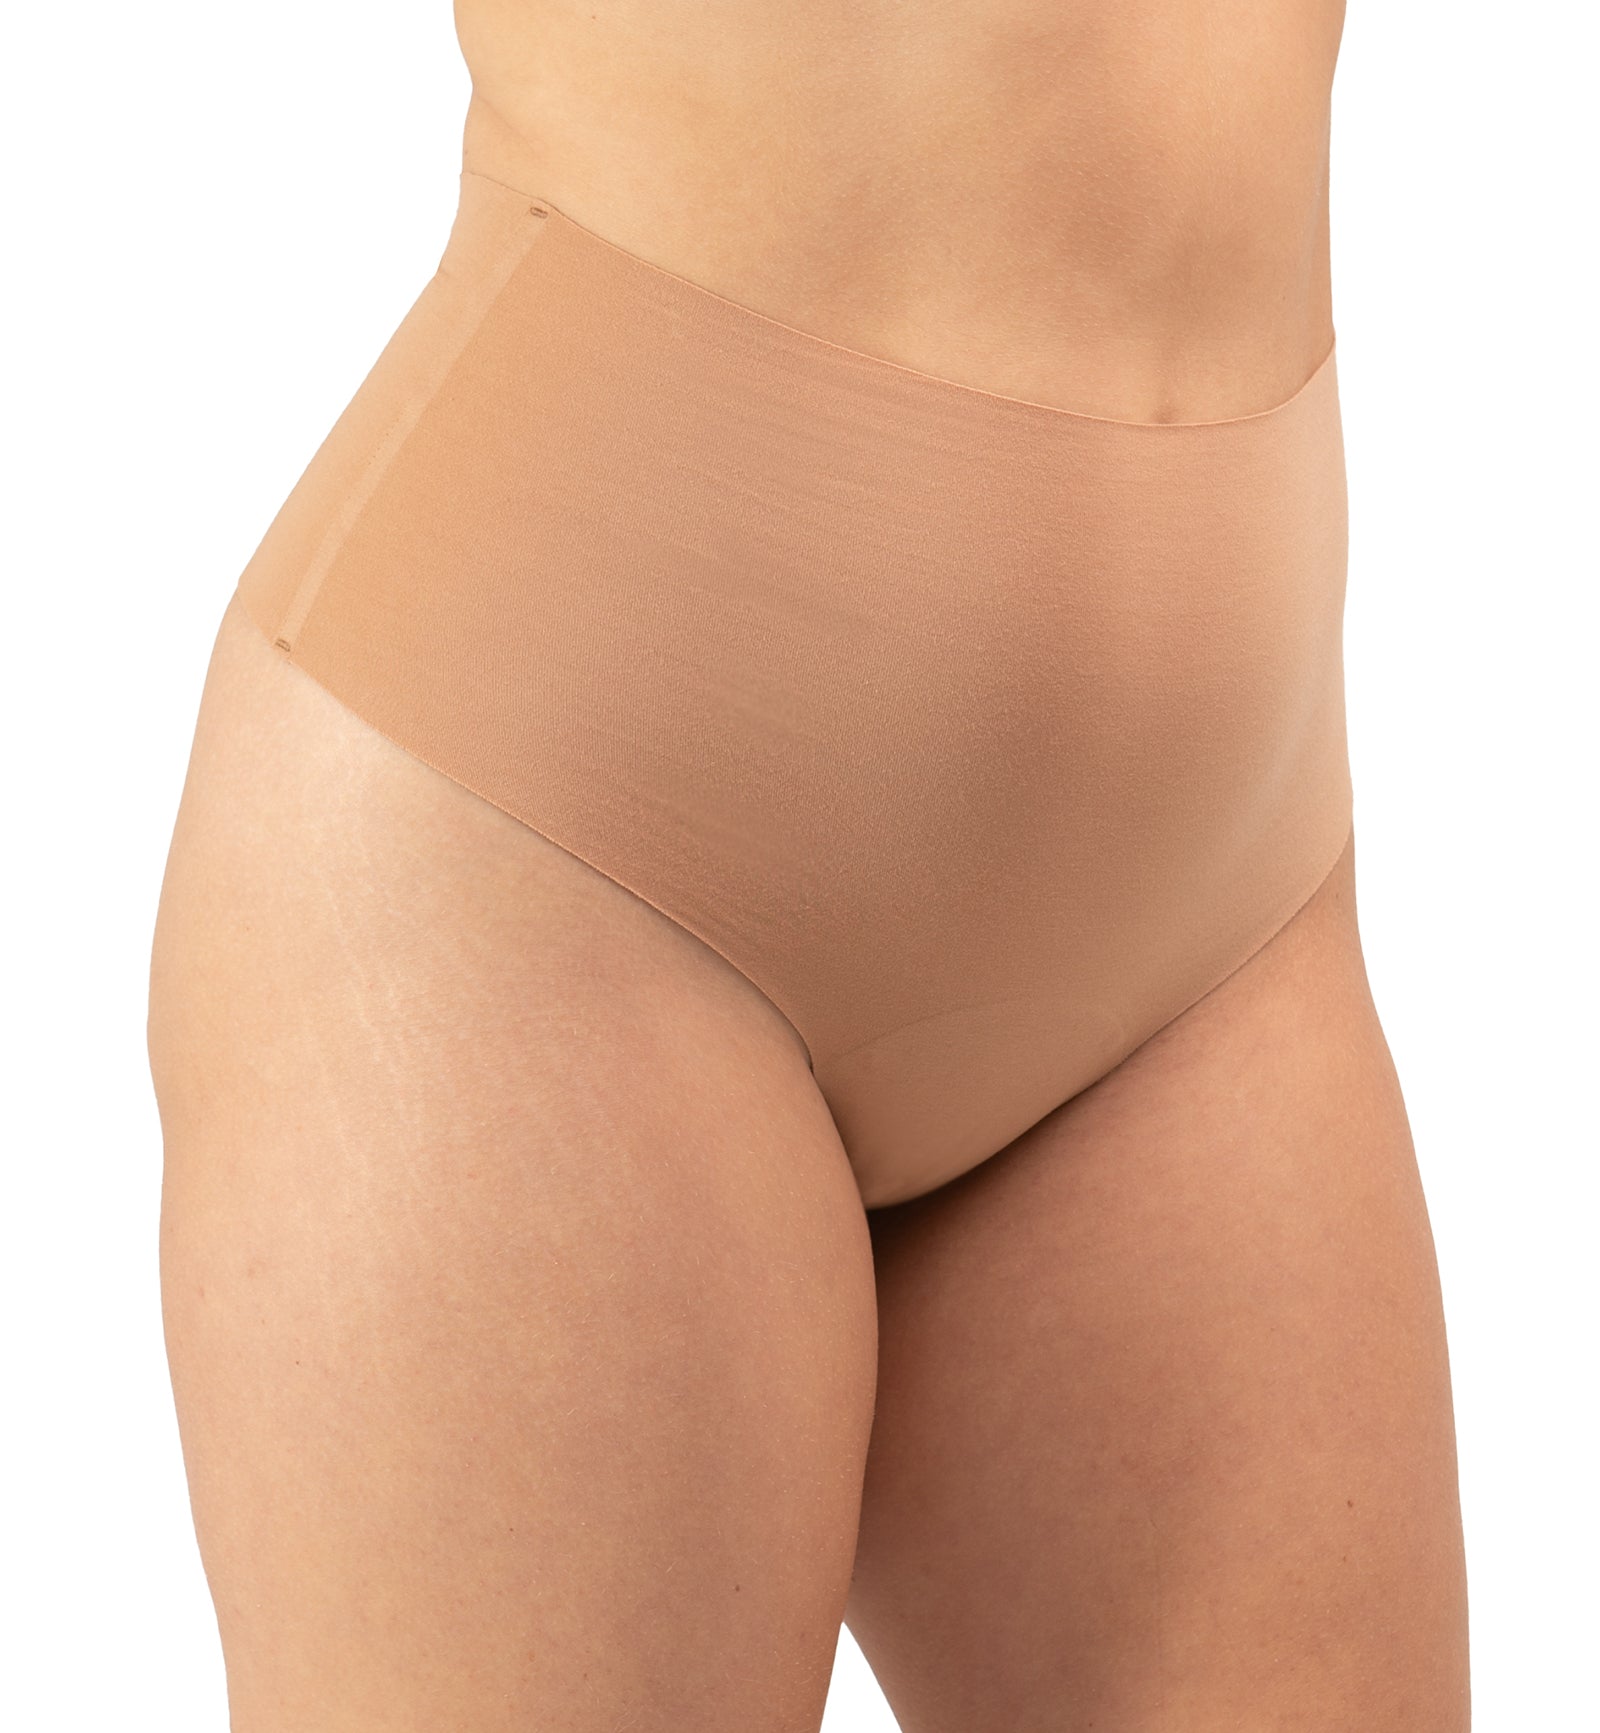 Panty Promise High Waist Thong,XS,Sand - Sand,XS